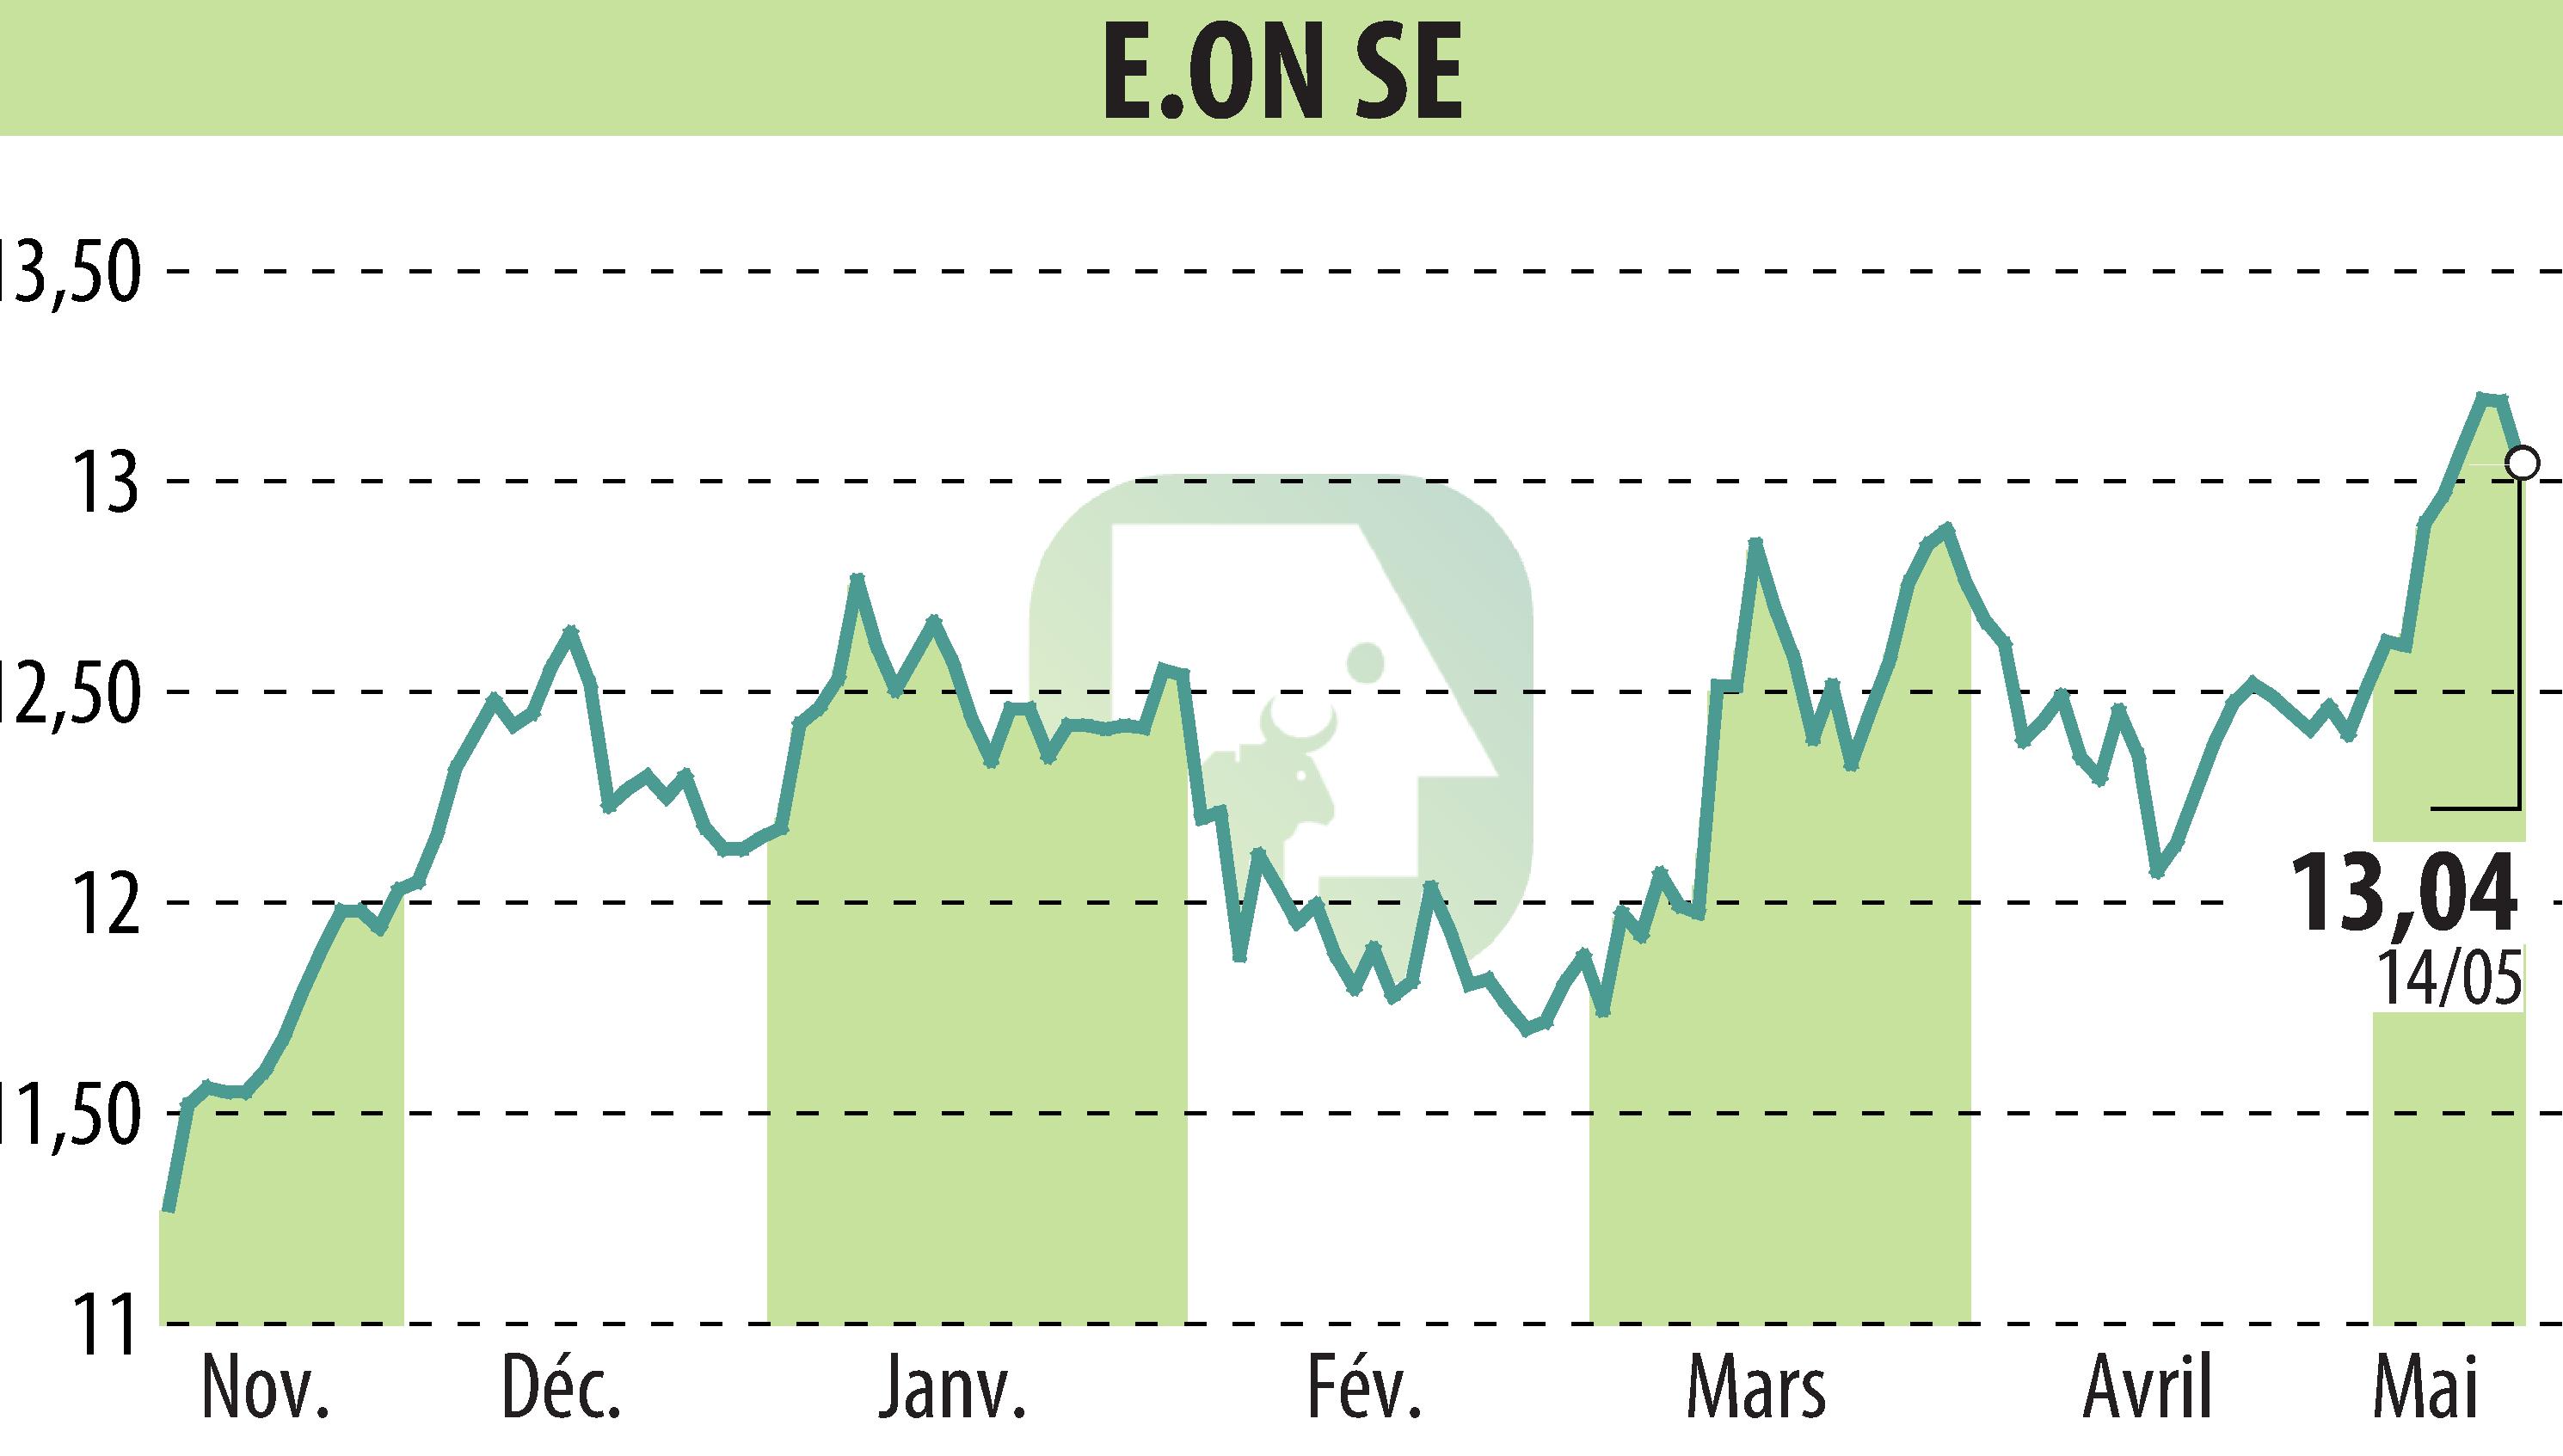 Stock price chart of E.ON SE (EBR:EOAN) showing fluctuations.